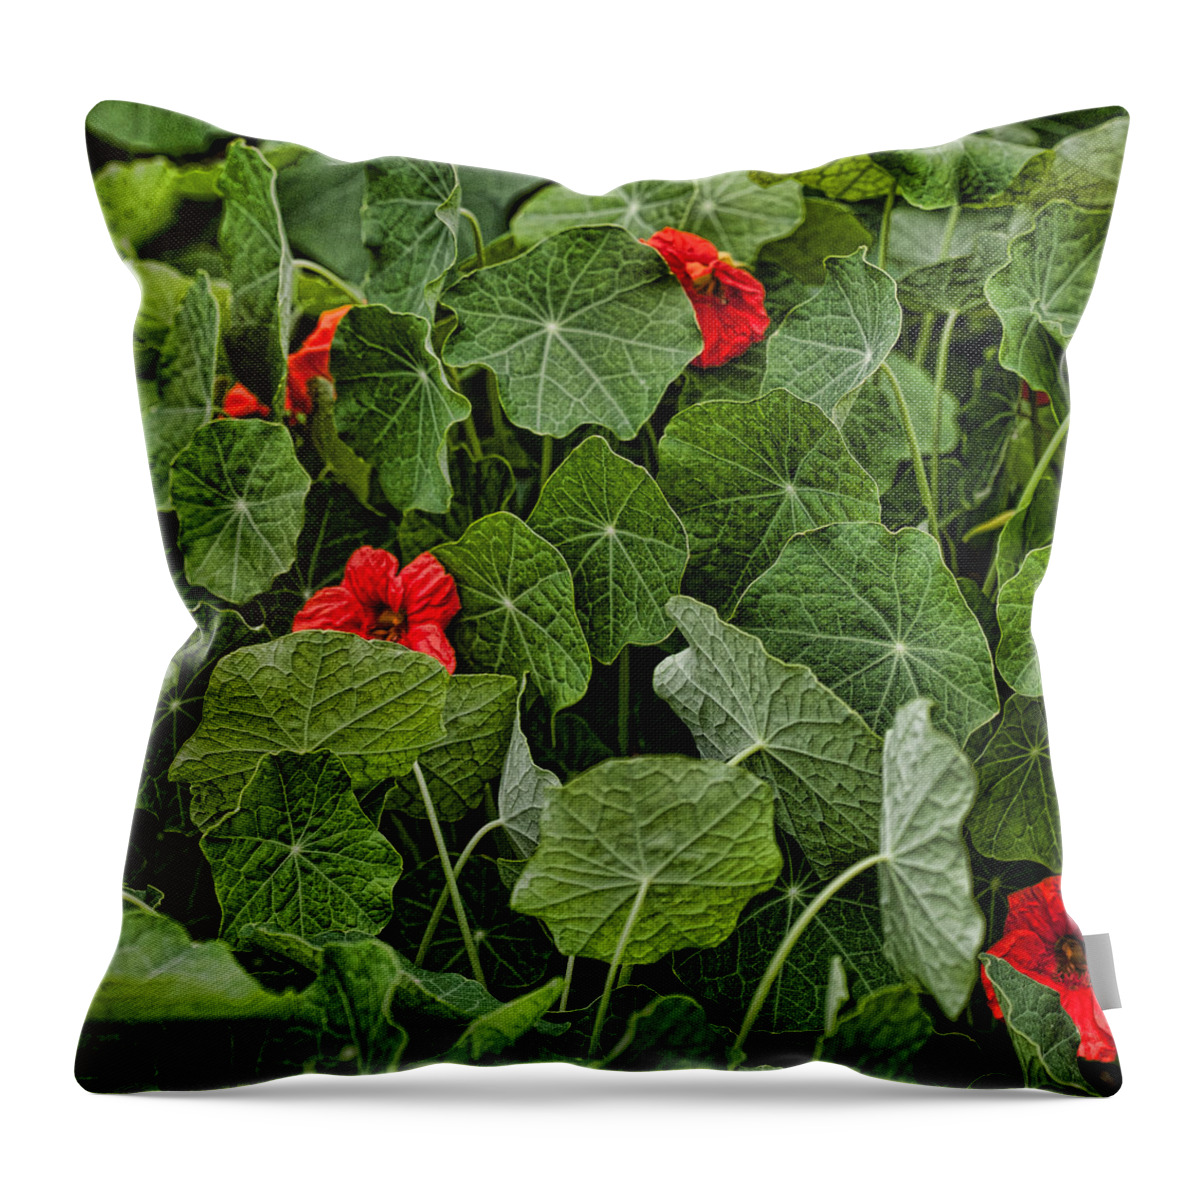 Ruffly Leaves Throw Pillow featuring the photograph Peekaboo #1 by Bonnie Bruno